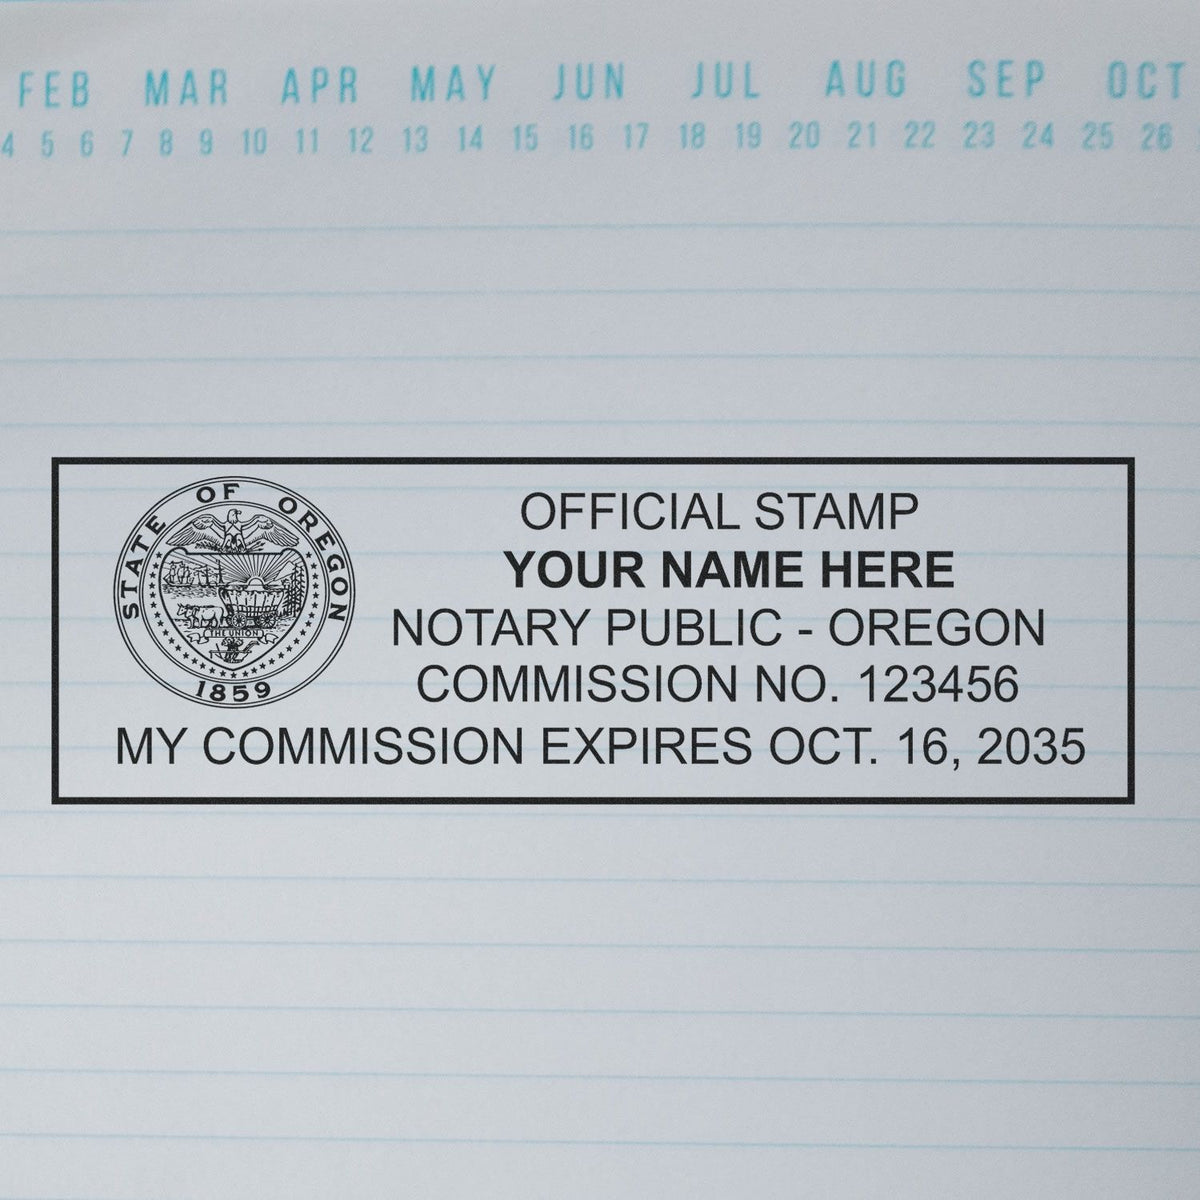 An alternative view of the Super Slim Oregon Notary Public Stamp stamped on a sheet of paper showing the image in use